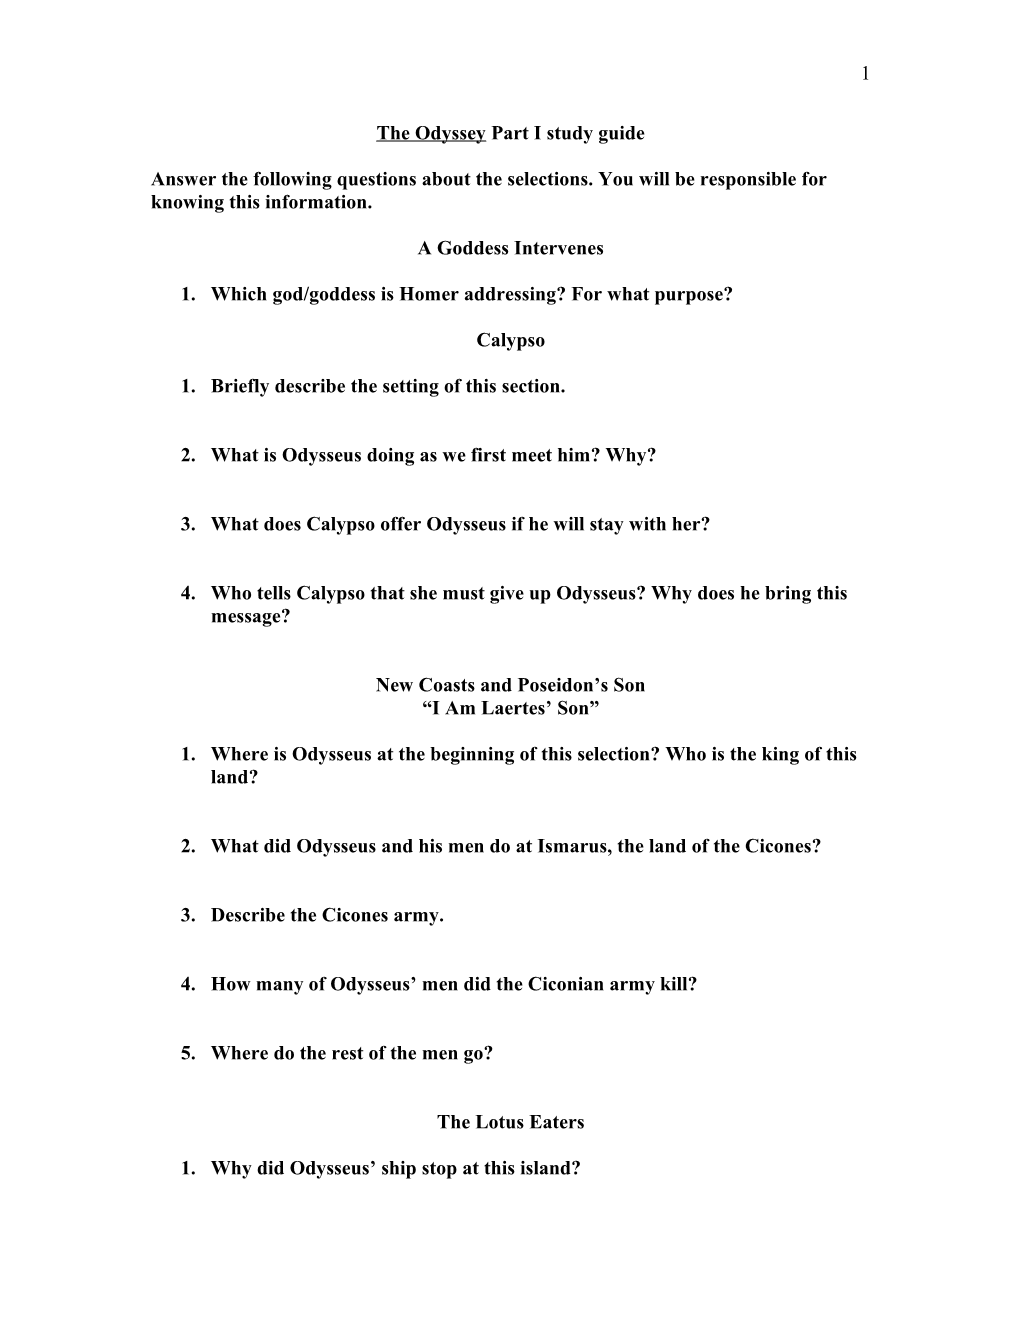 The Odyssey Part I Study Guide